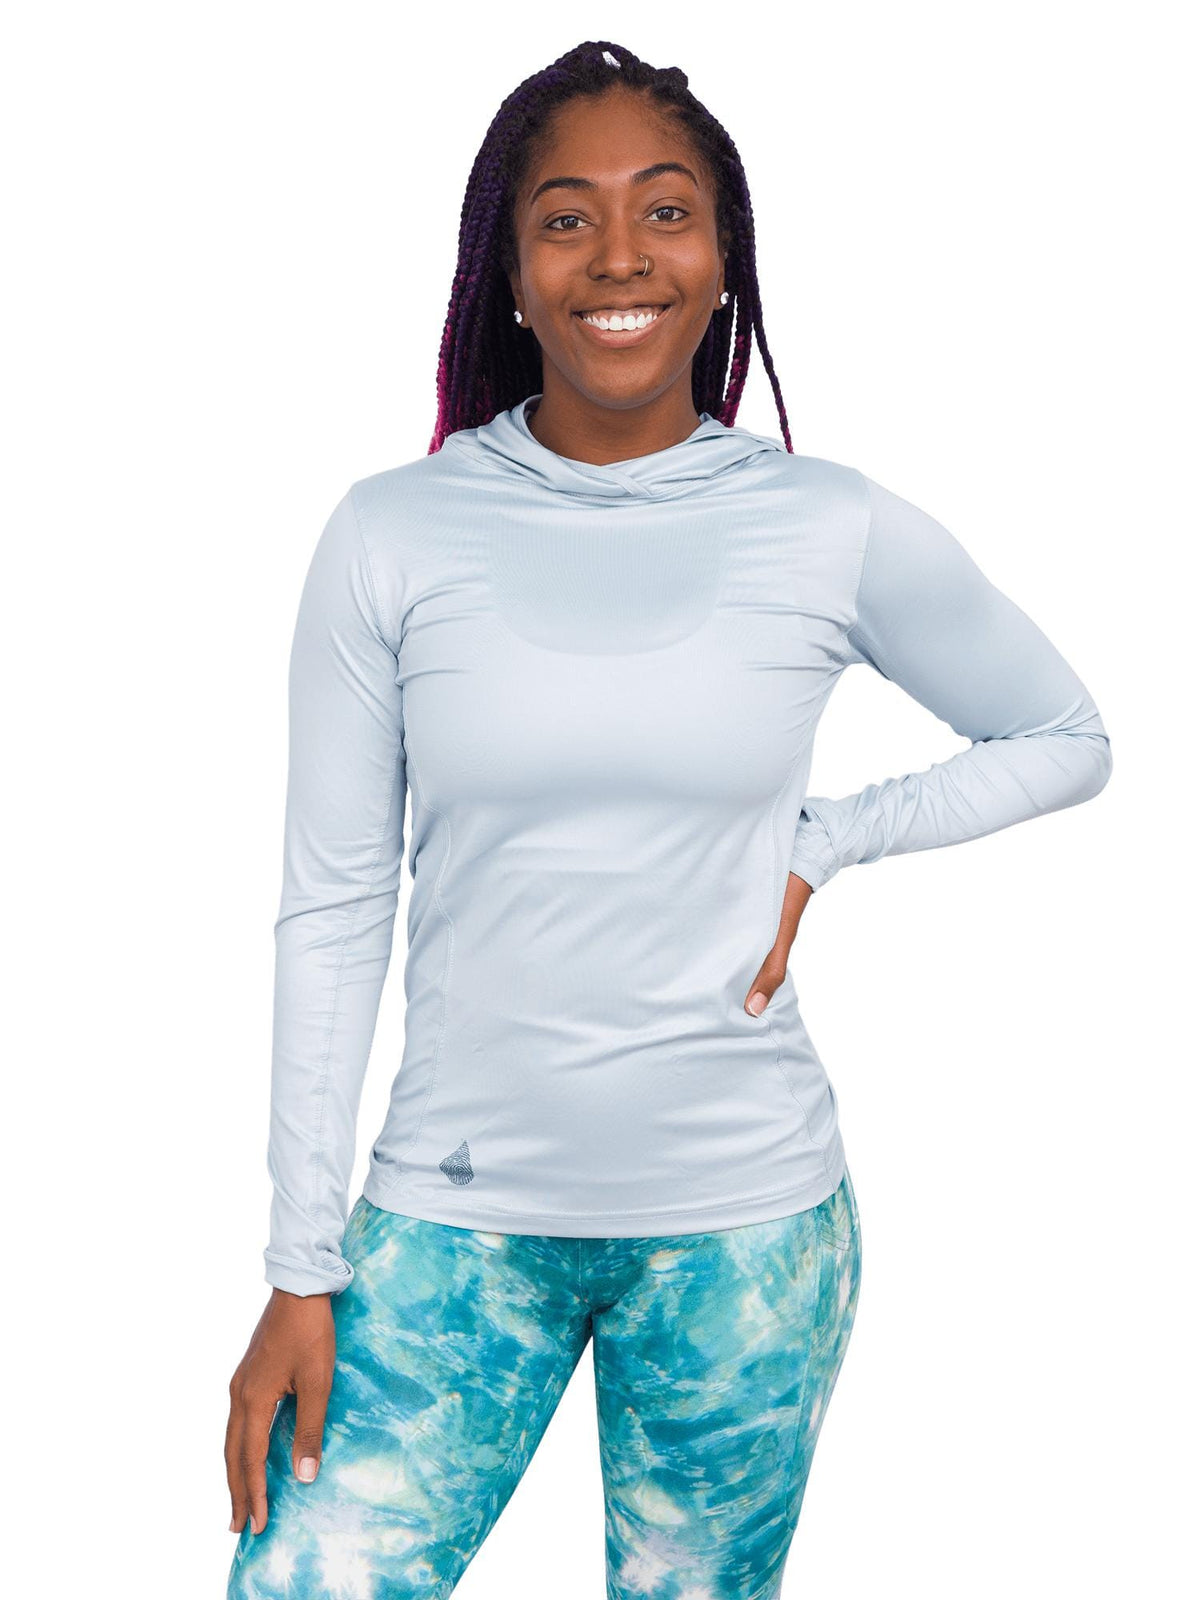 Model: Carlee is a shark &amp; sea turtle scientist and co-founder of Minorities in Shark Sciences. She is 5’7”, 145 lbs, 36C and is wearing a S sun shirt and M legging.